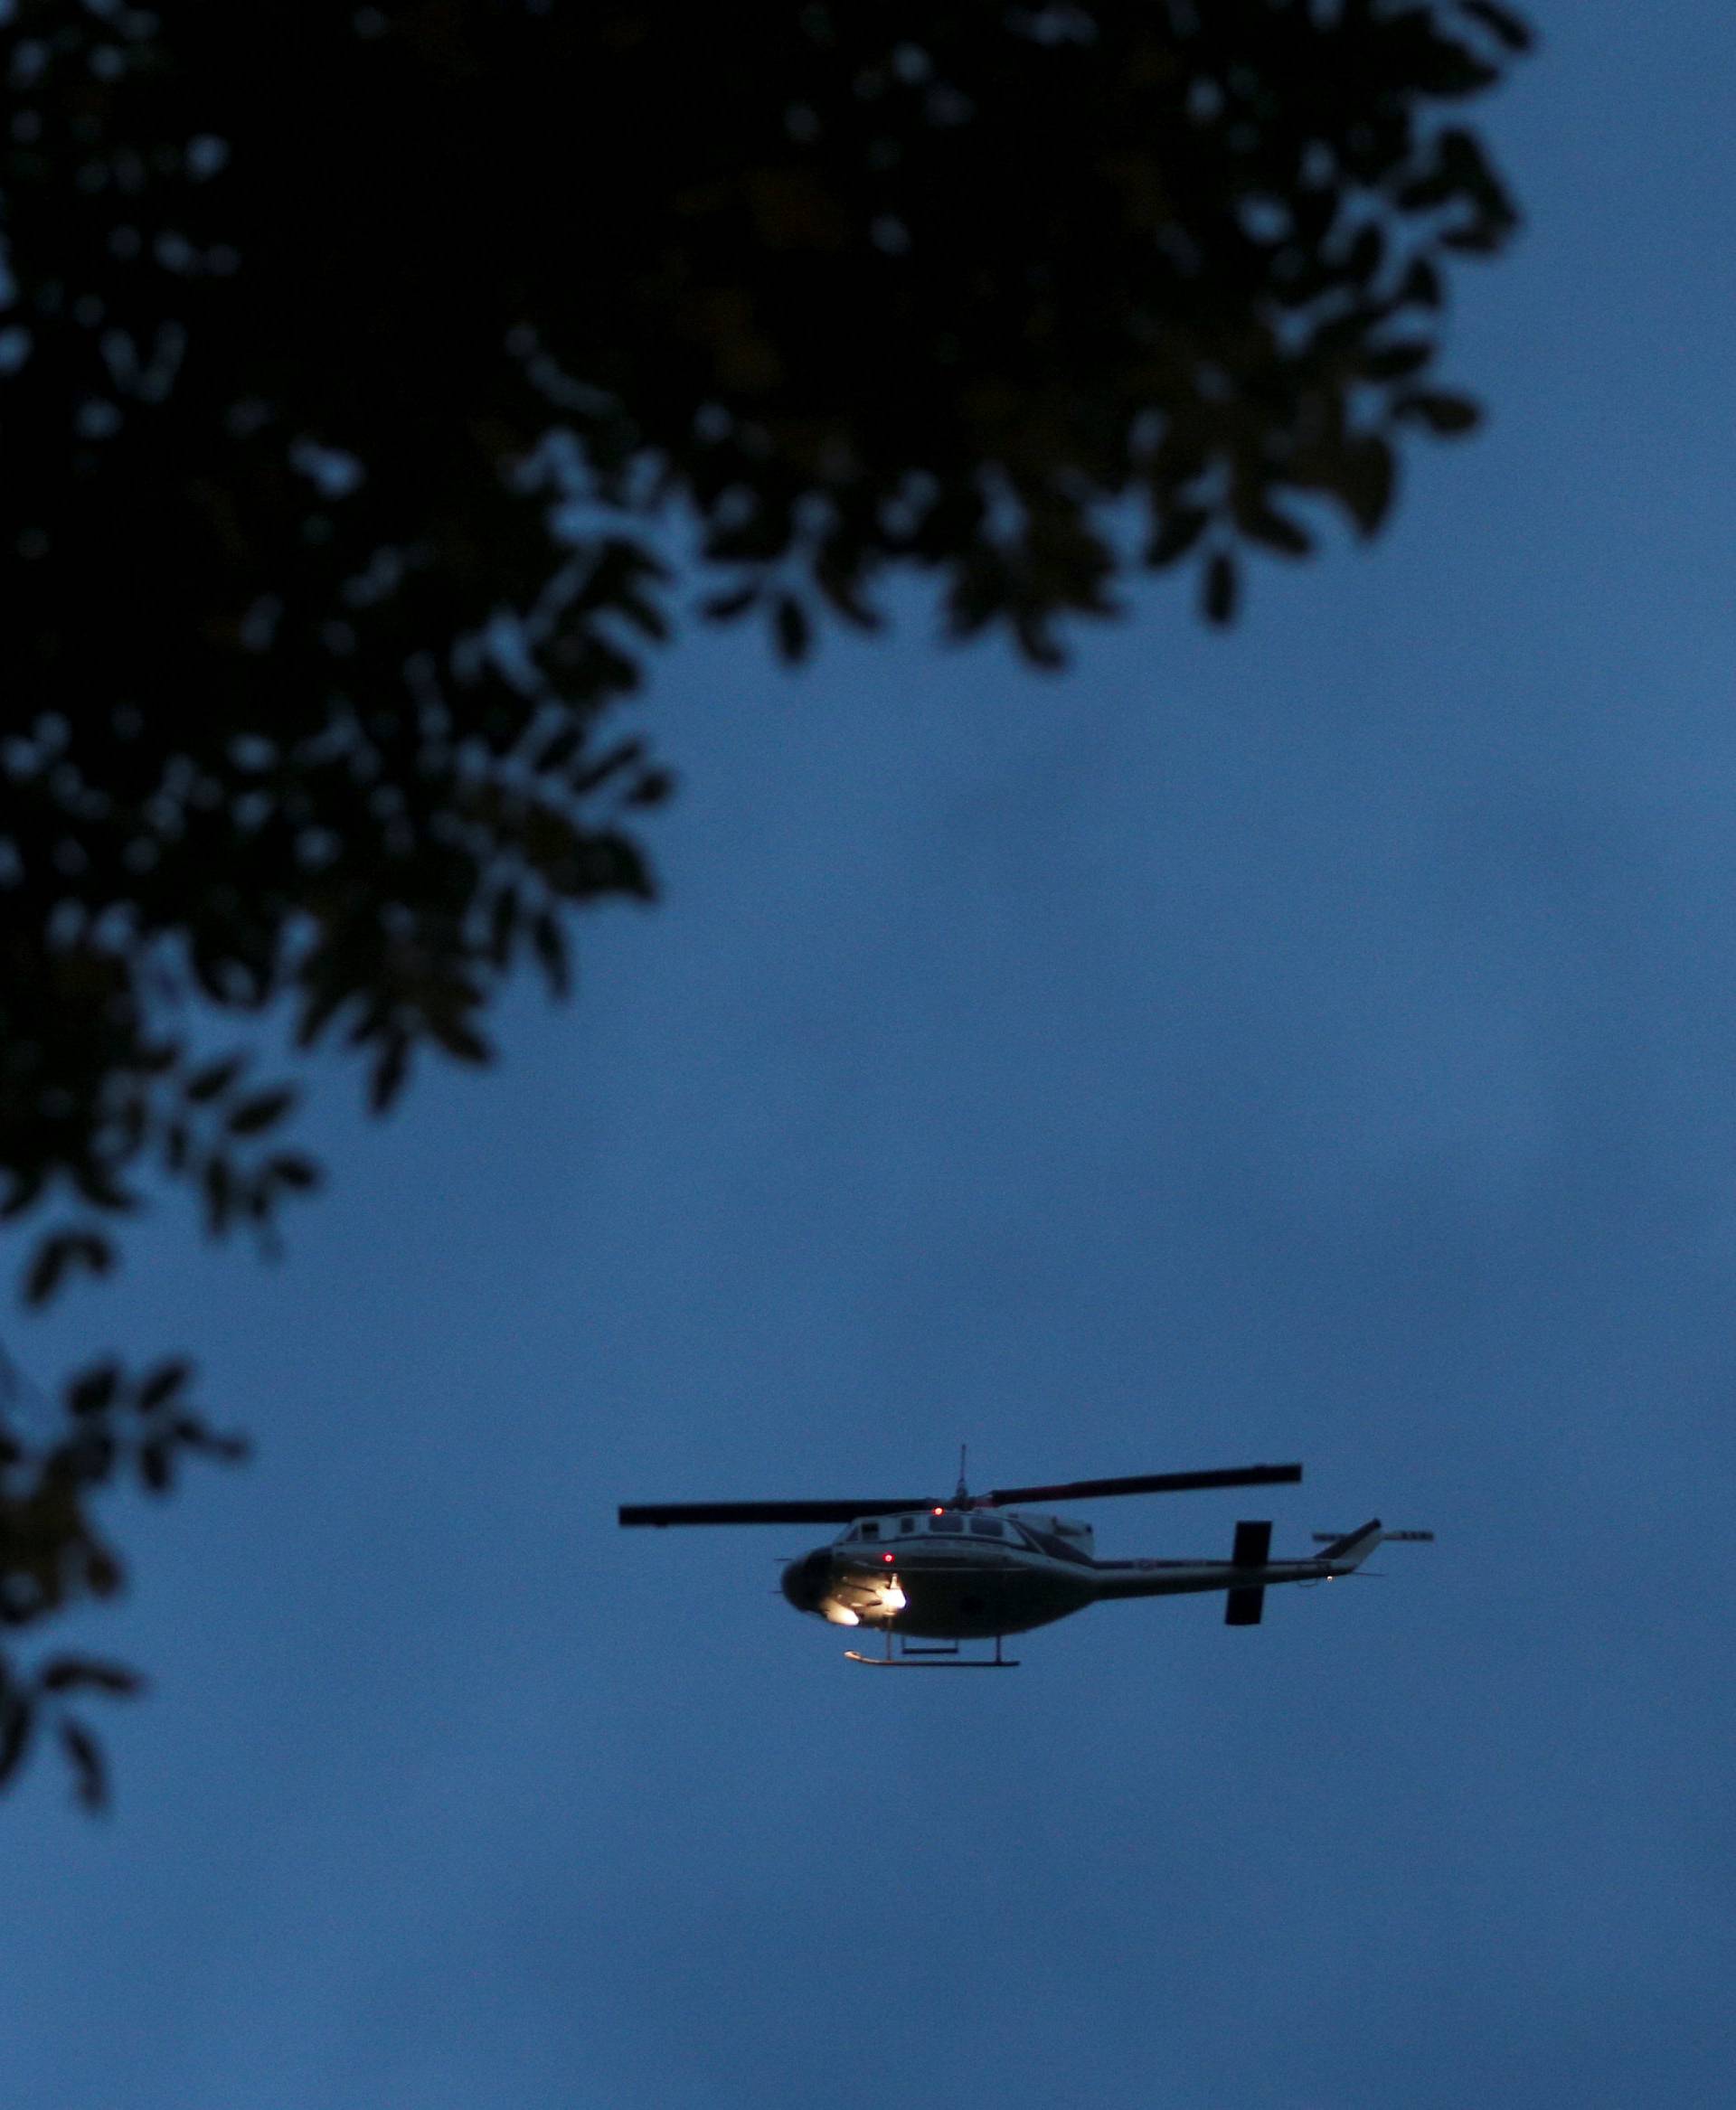 A police helicopter flies over the Tham Luang cave in the northern province of Chiang Rai